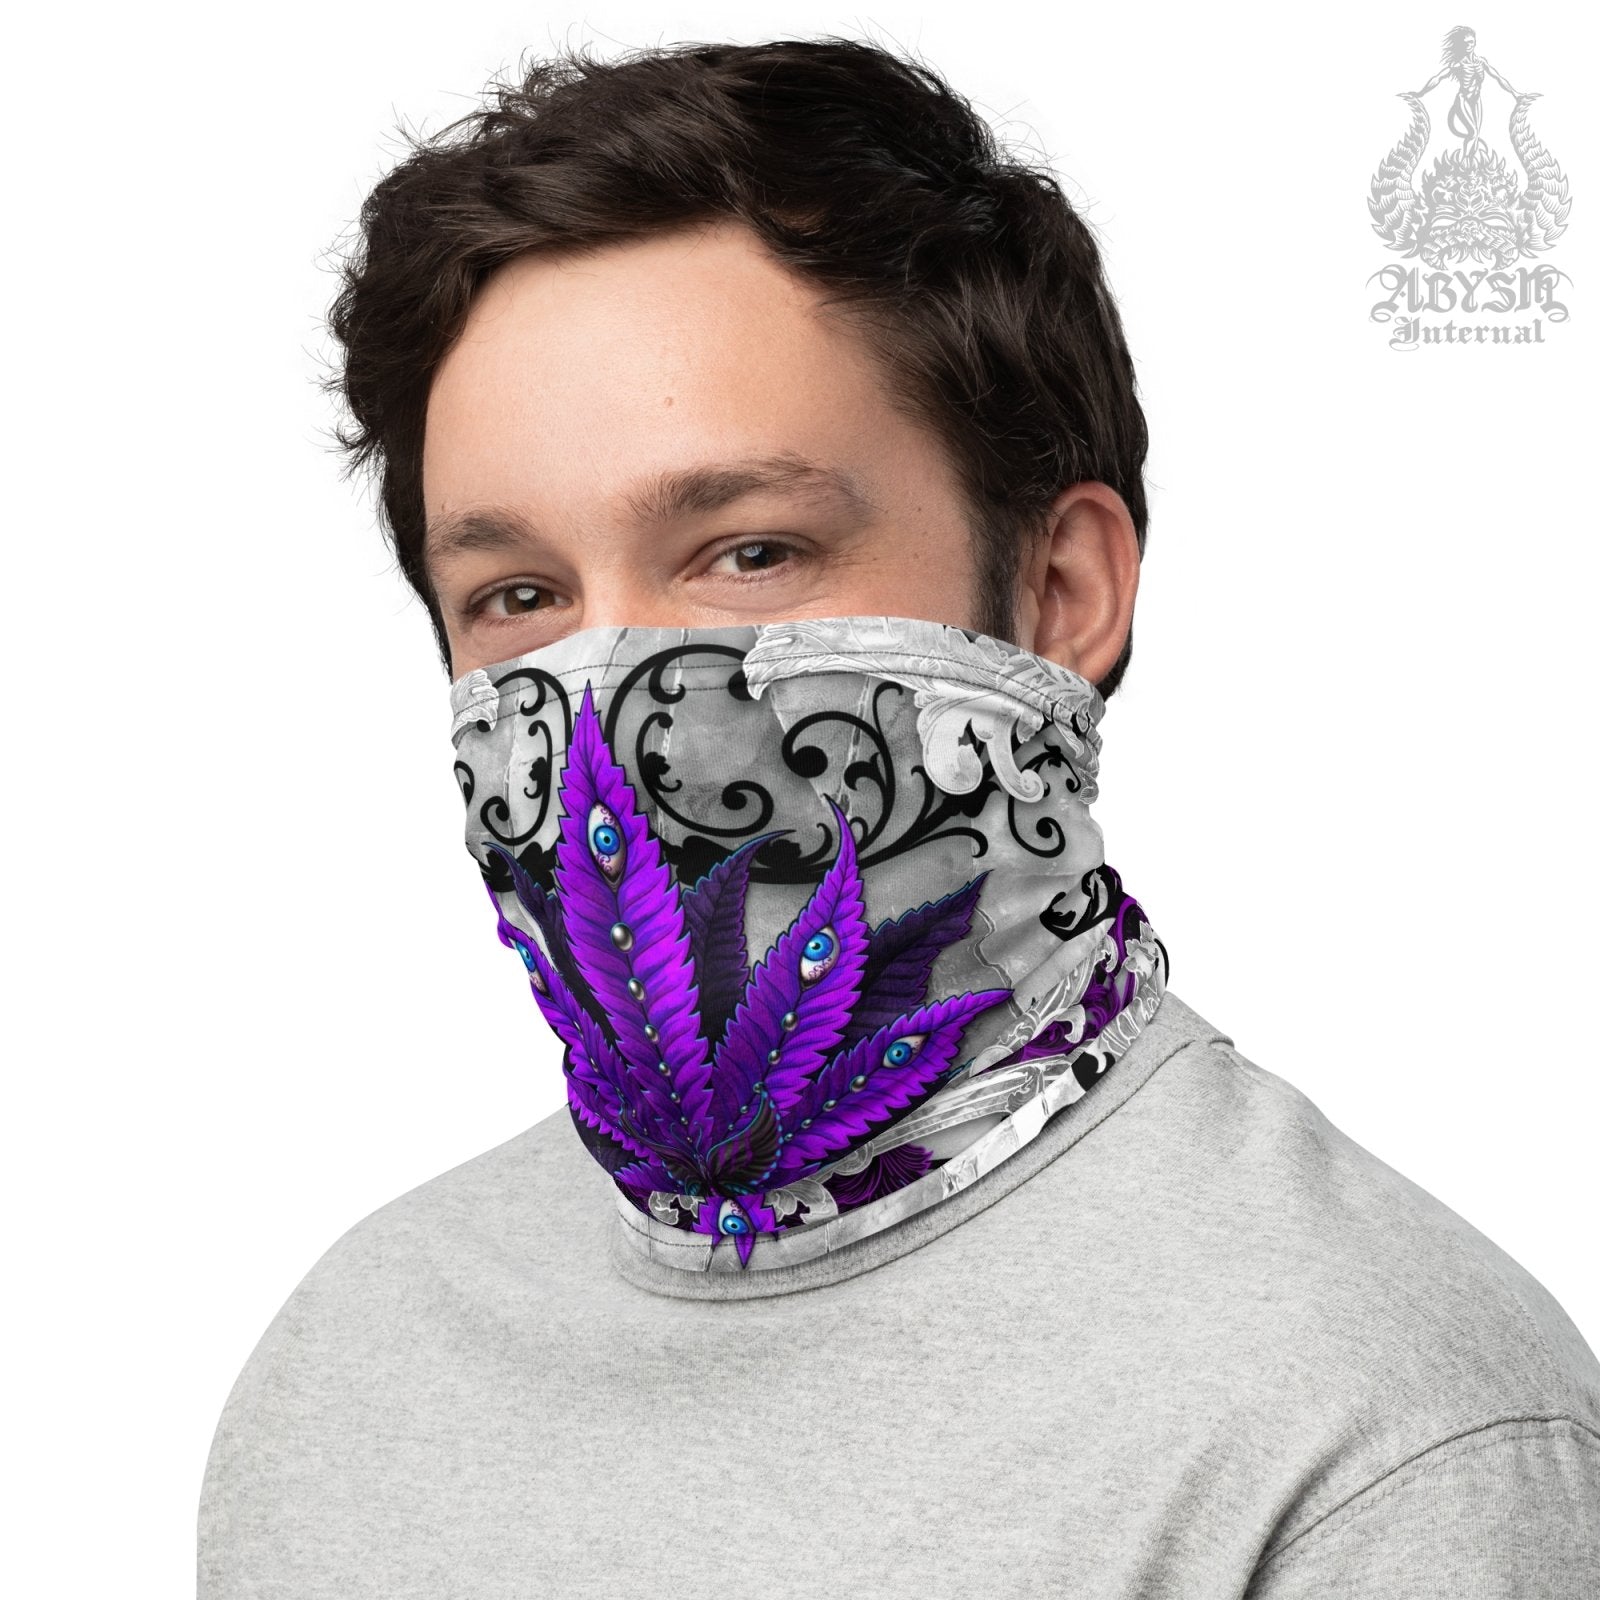 Cannabis Neck Gaiter, Weed Face Mask, White Goth Marijuana Head Covering, Outdoors Festival Outfit, Heavy Metal Concert, 420 Gift - Gothic Purple - Abysm Internal